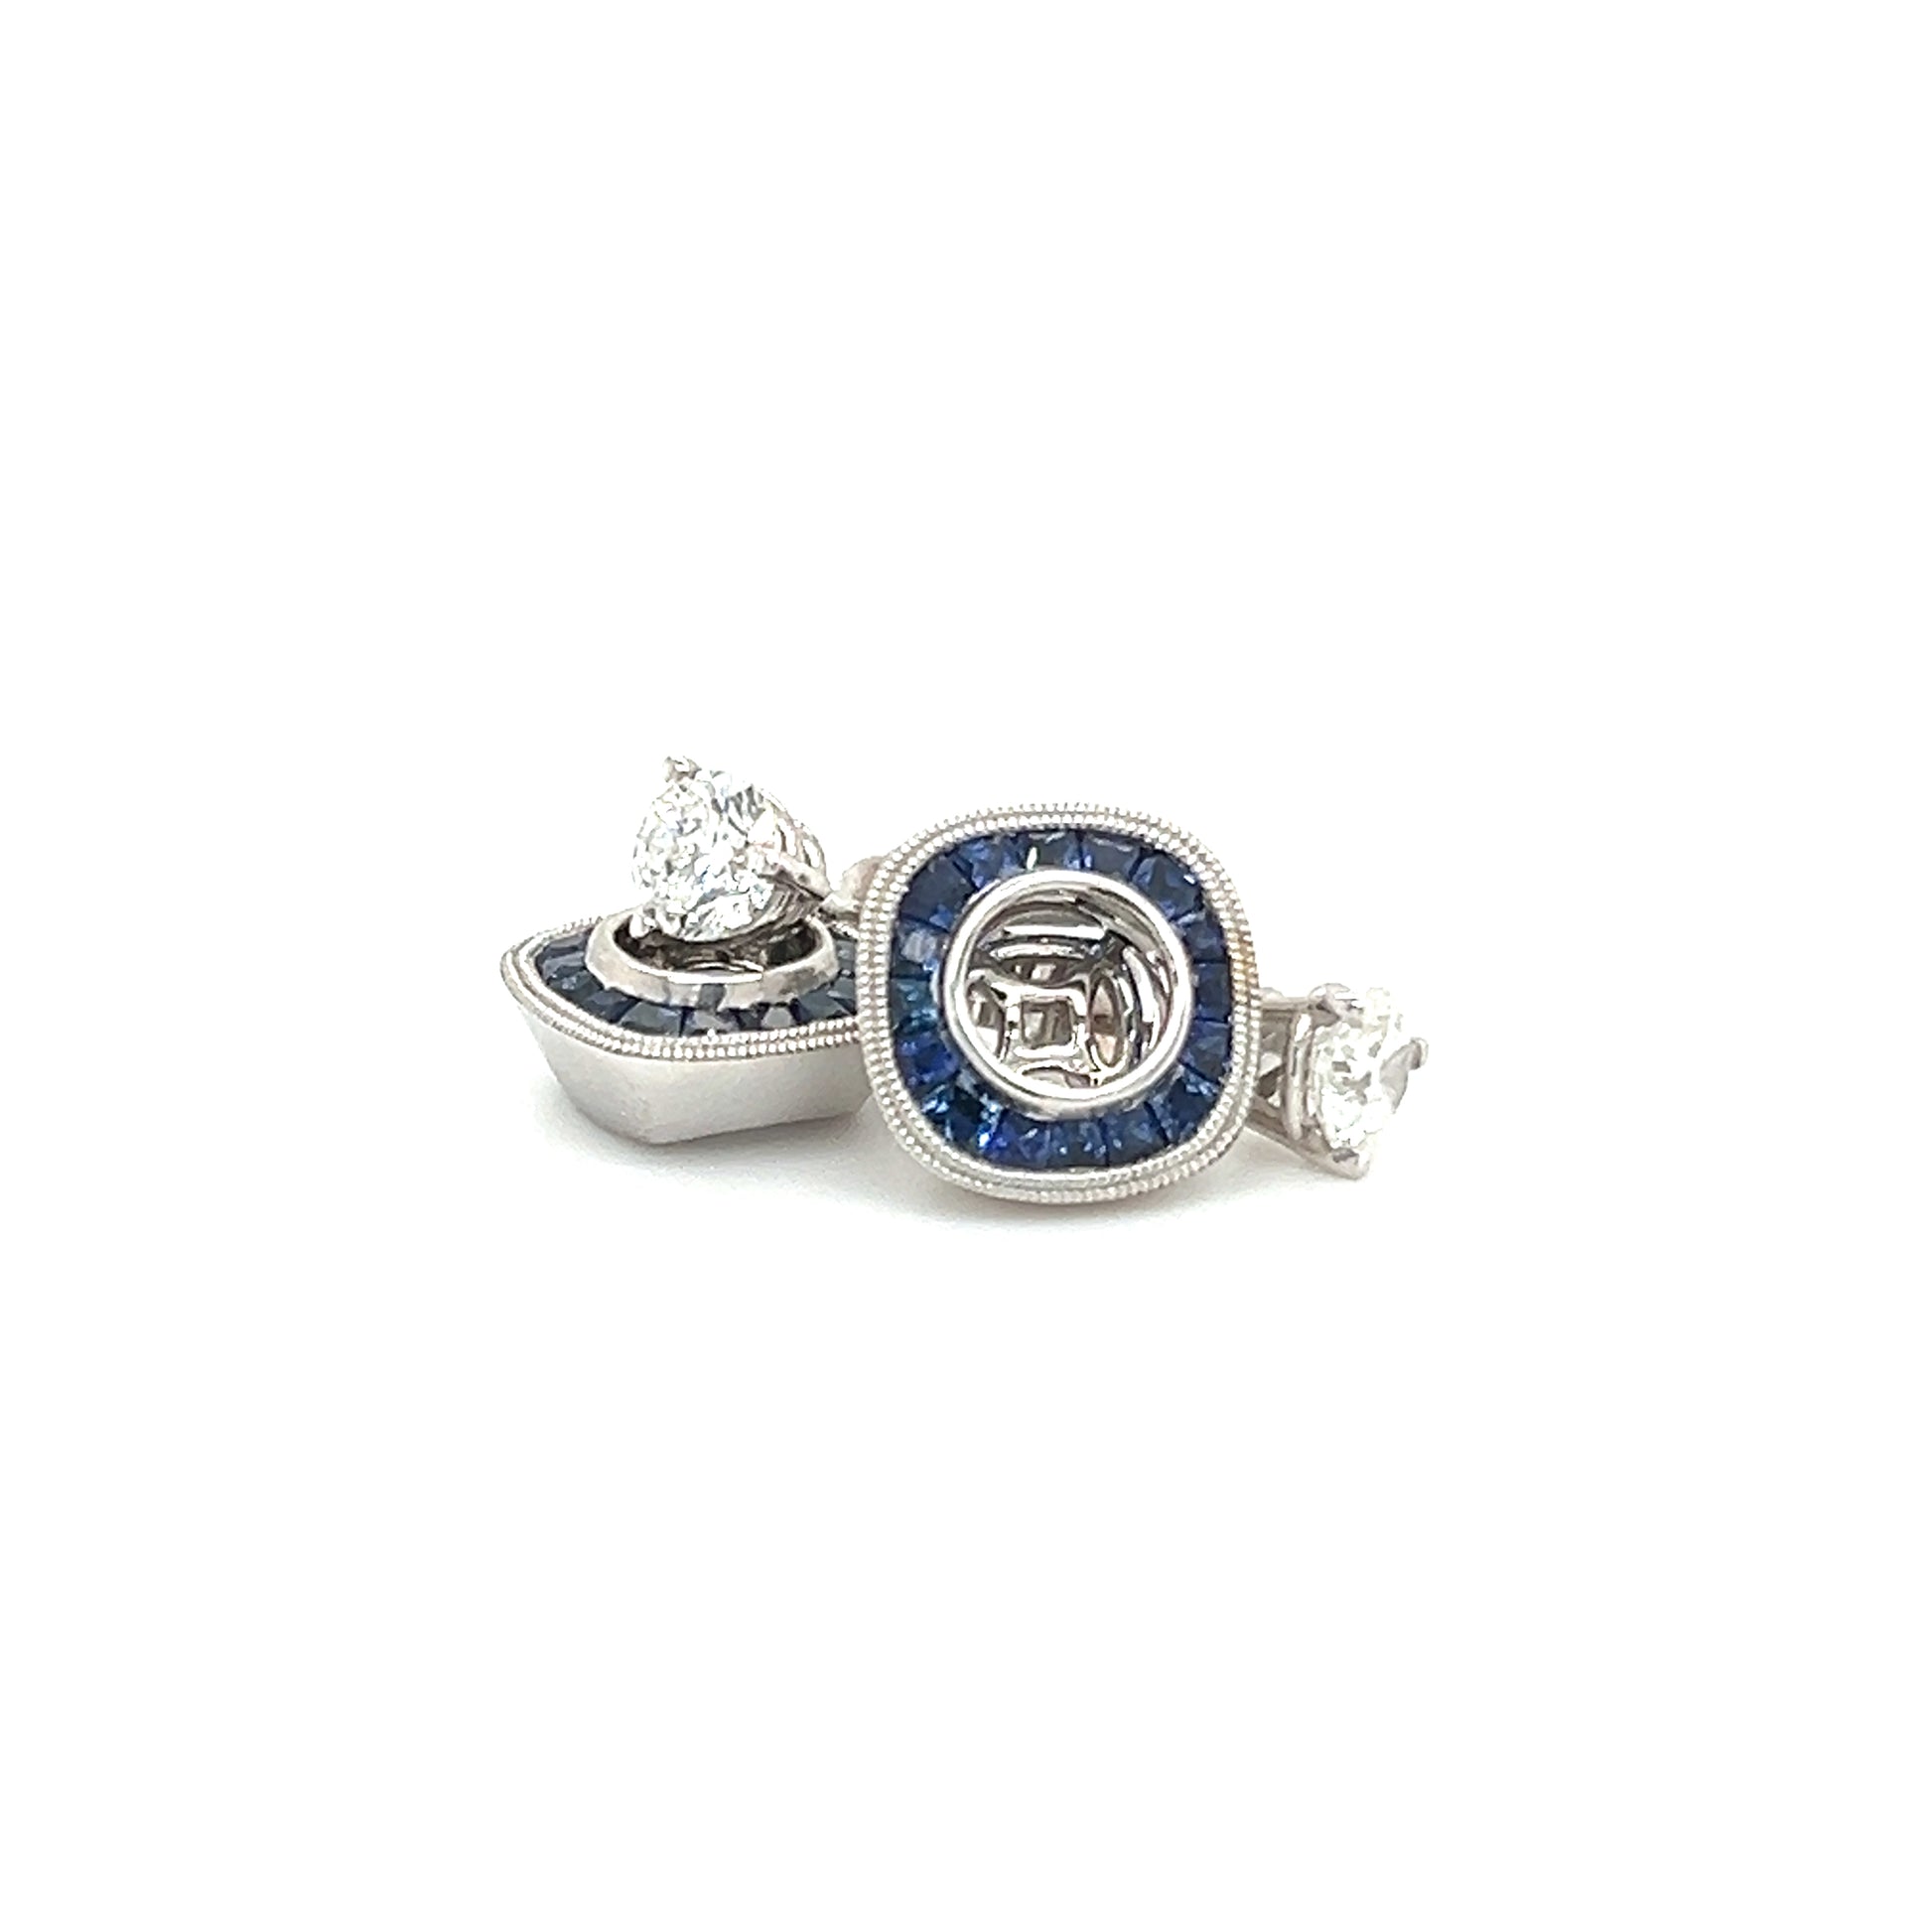 Diamond 0.72ctw Stud Earrings with Blue Sapphire Jackets in 14K White Gold Alternative View